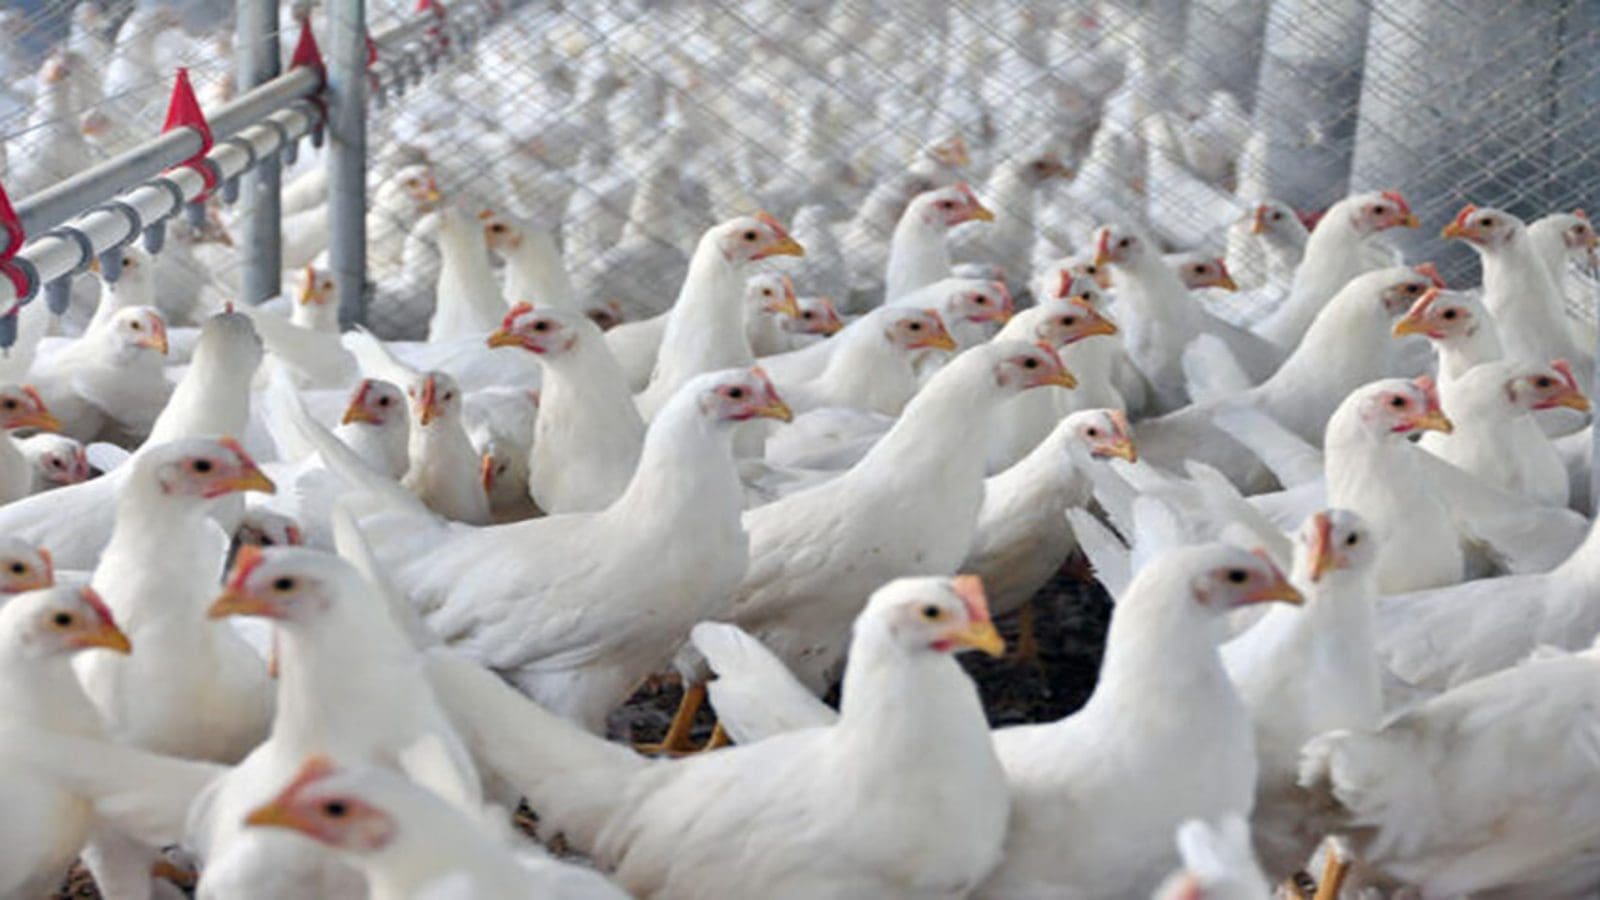 Atria celebrates Finno-Chinese agreement opening doors for Finnish poultry exports to China